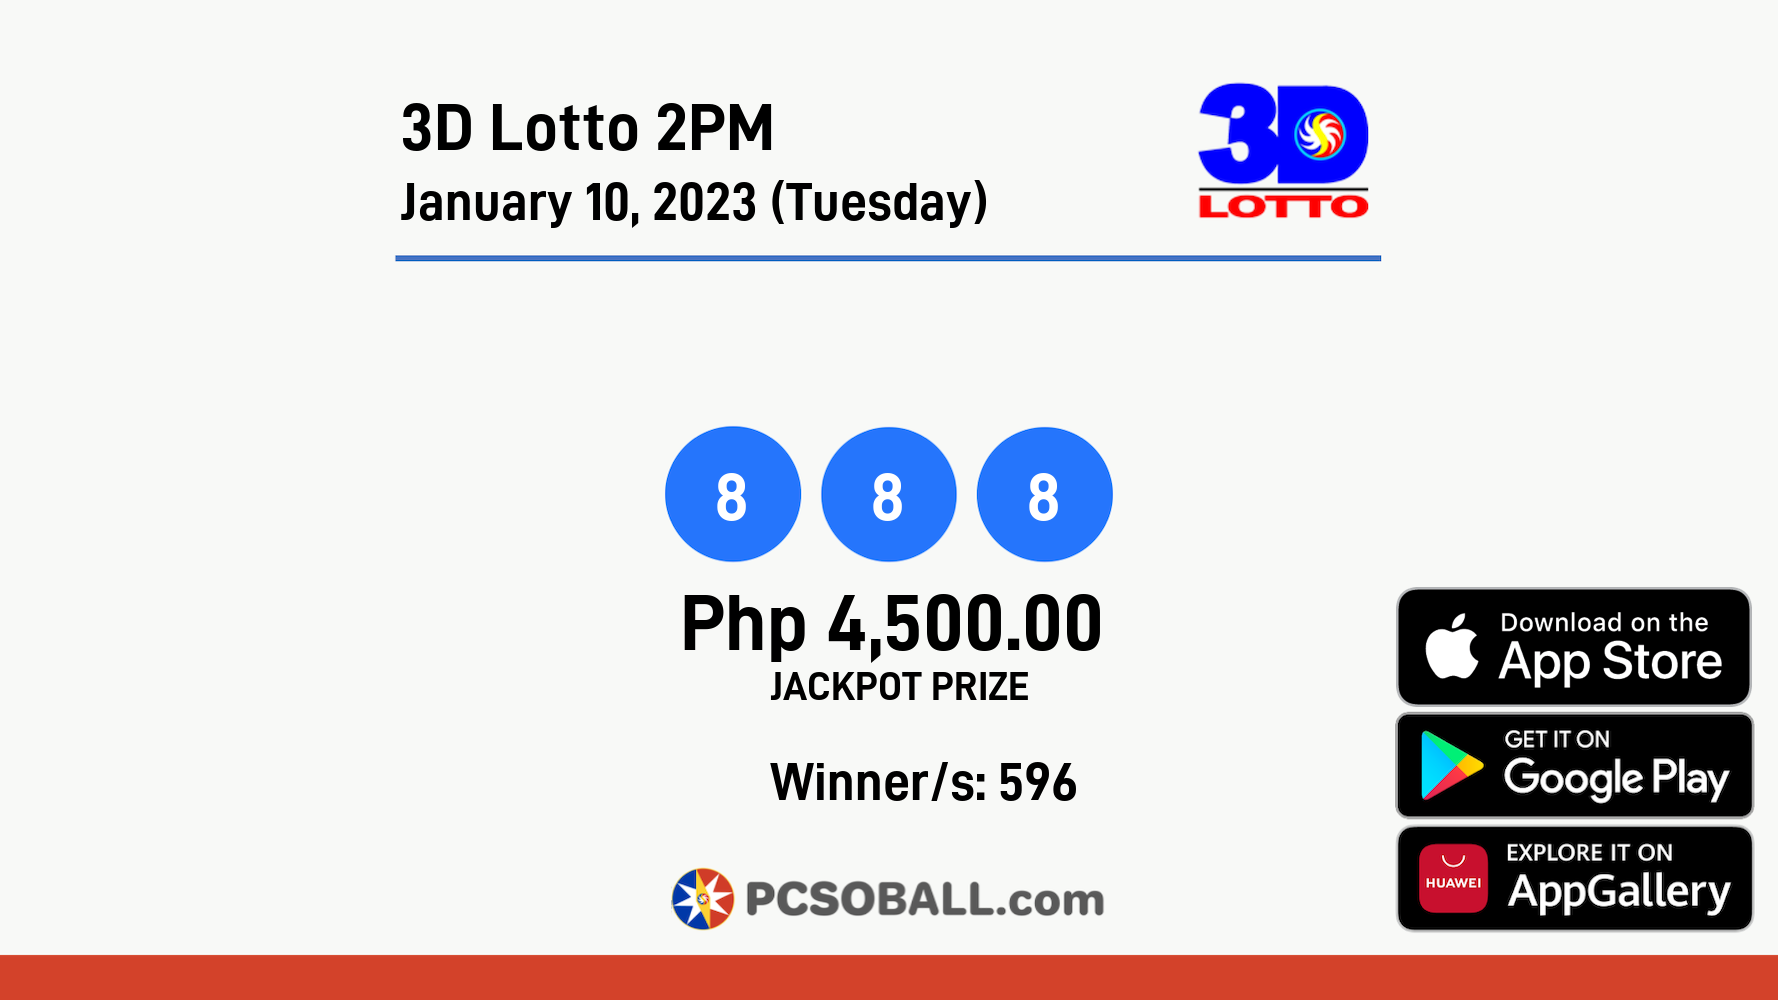 3D Lotto 2PM January 10, 2023 (Tuesday) Result